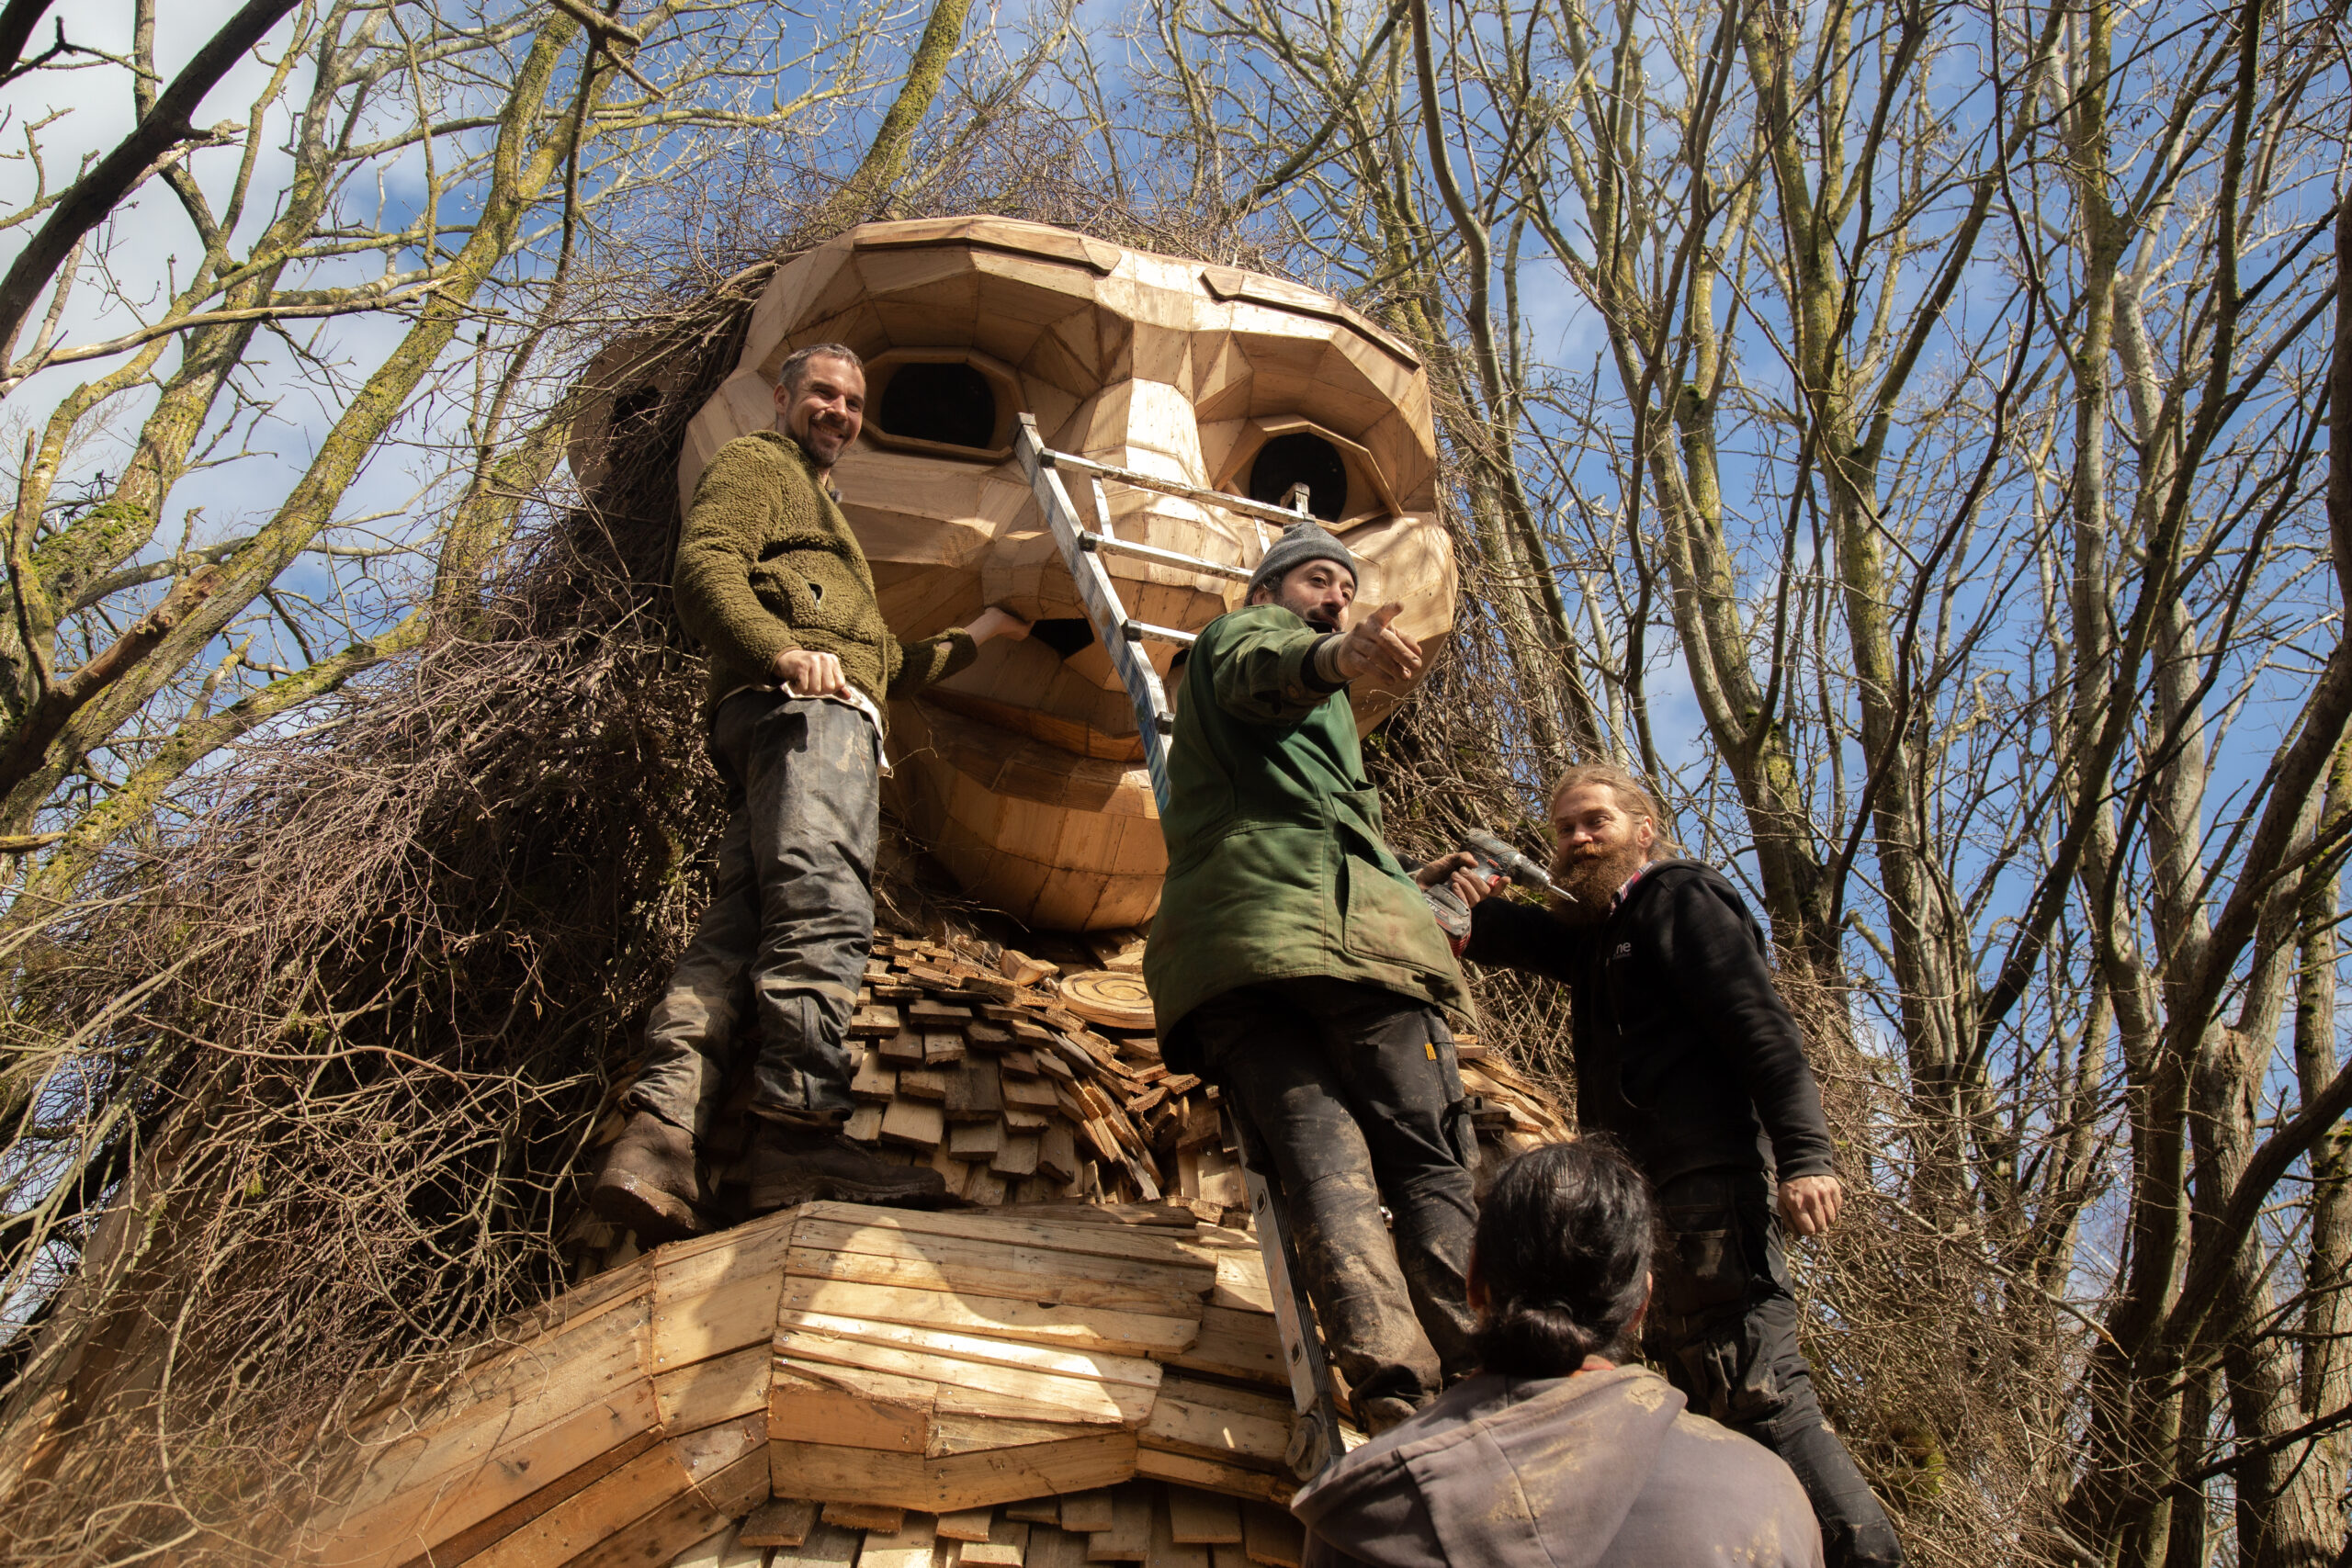 People work on building a giant wooden troll statue